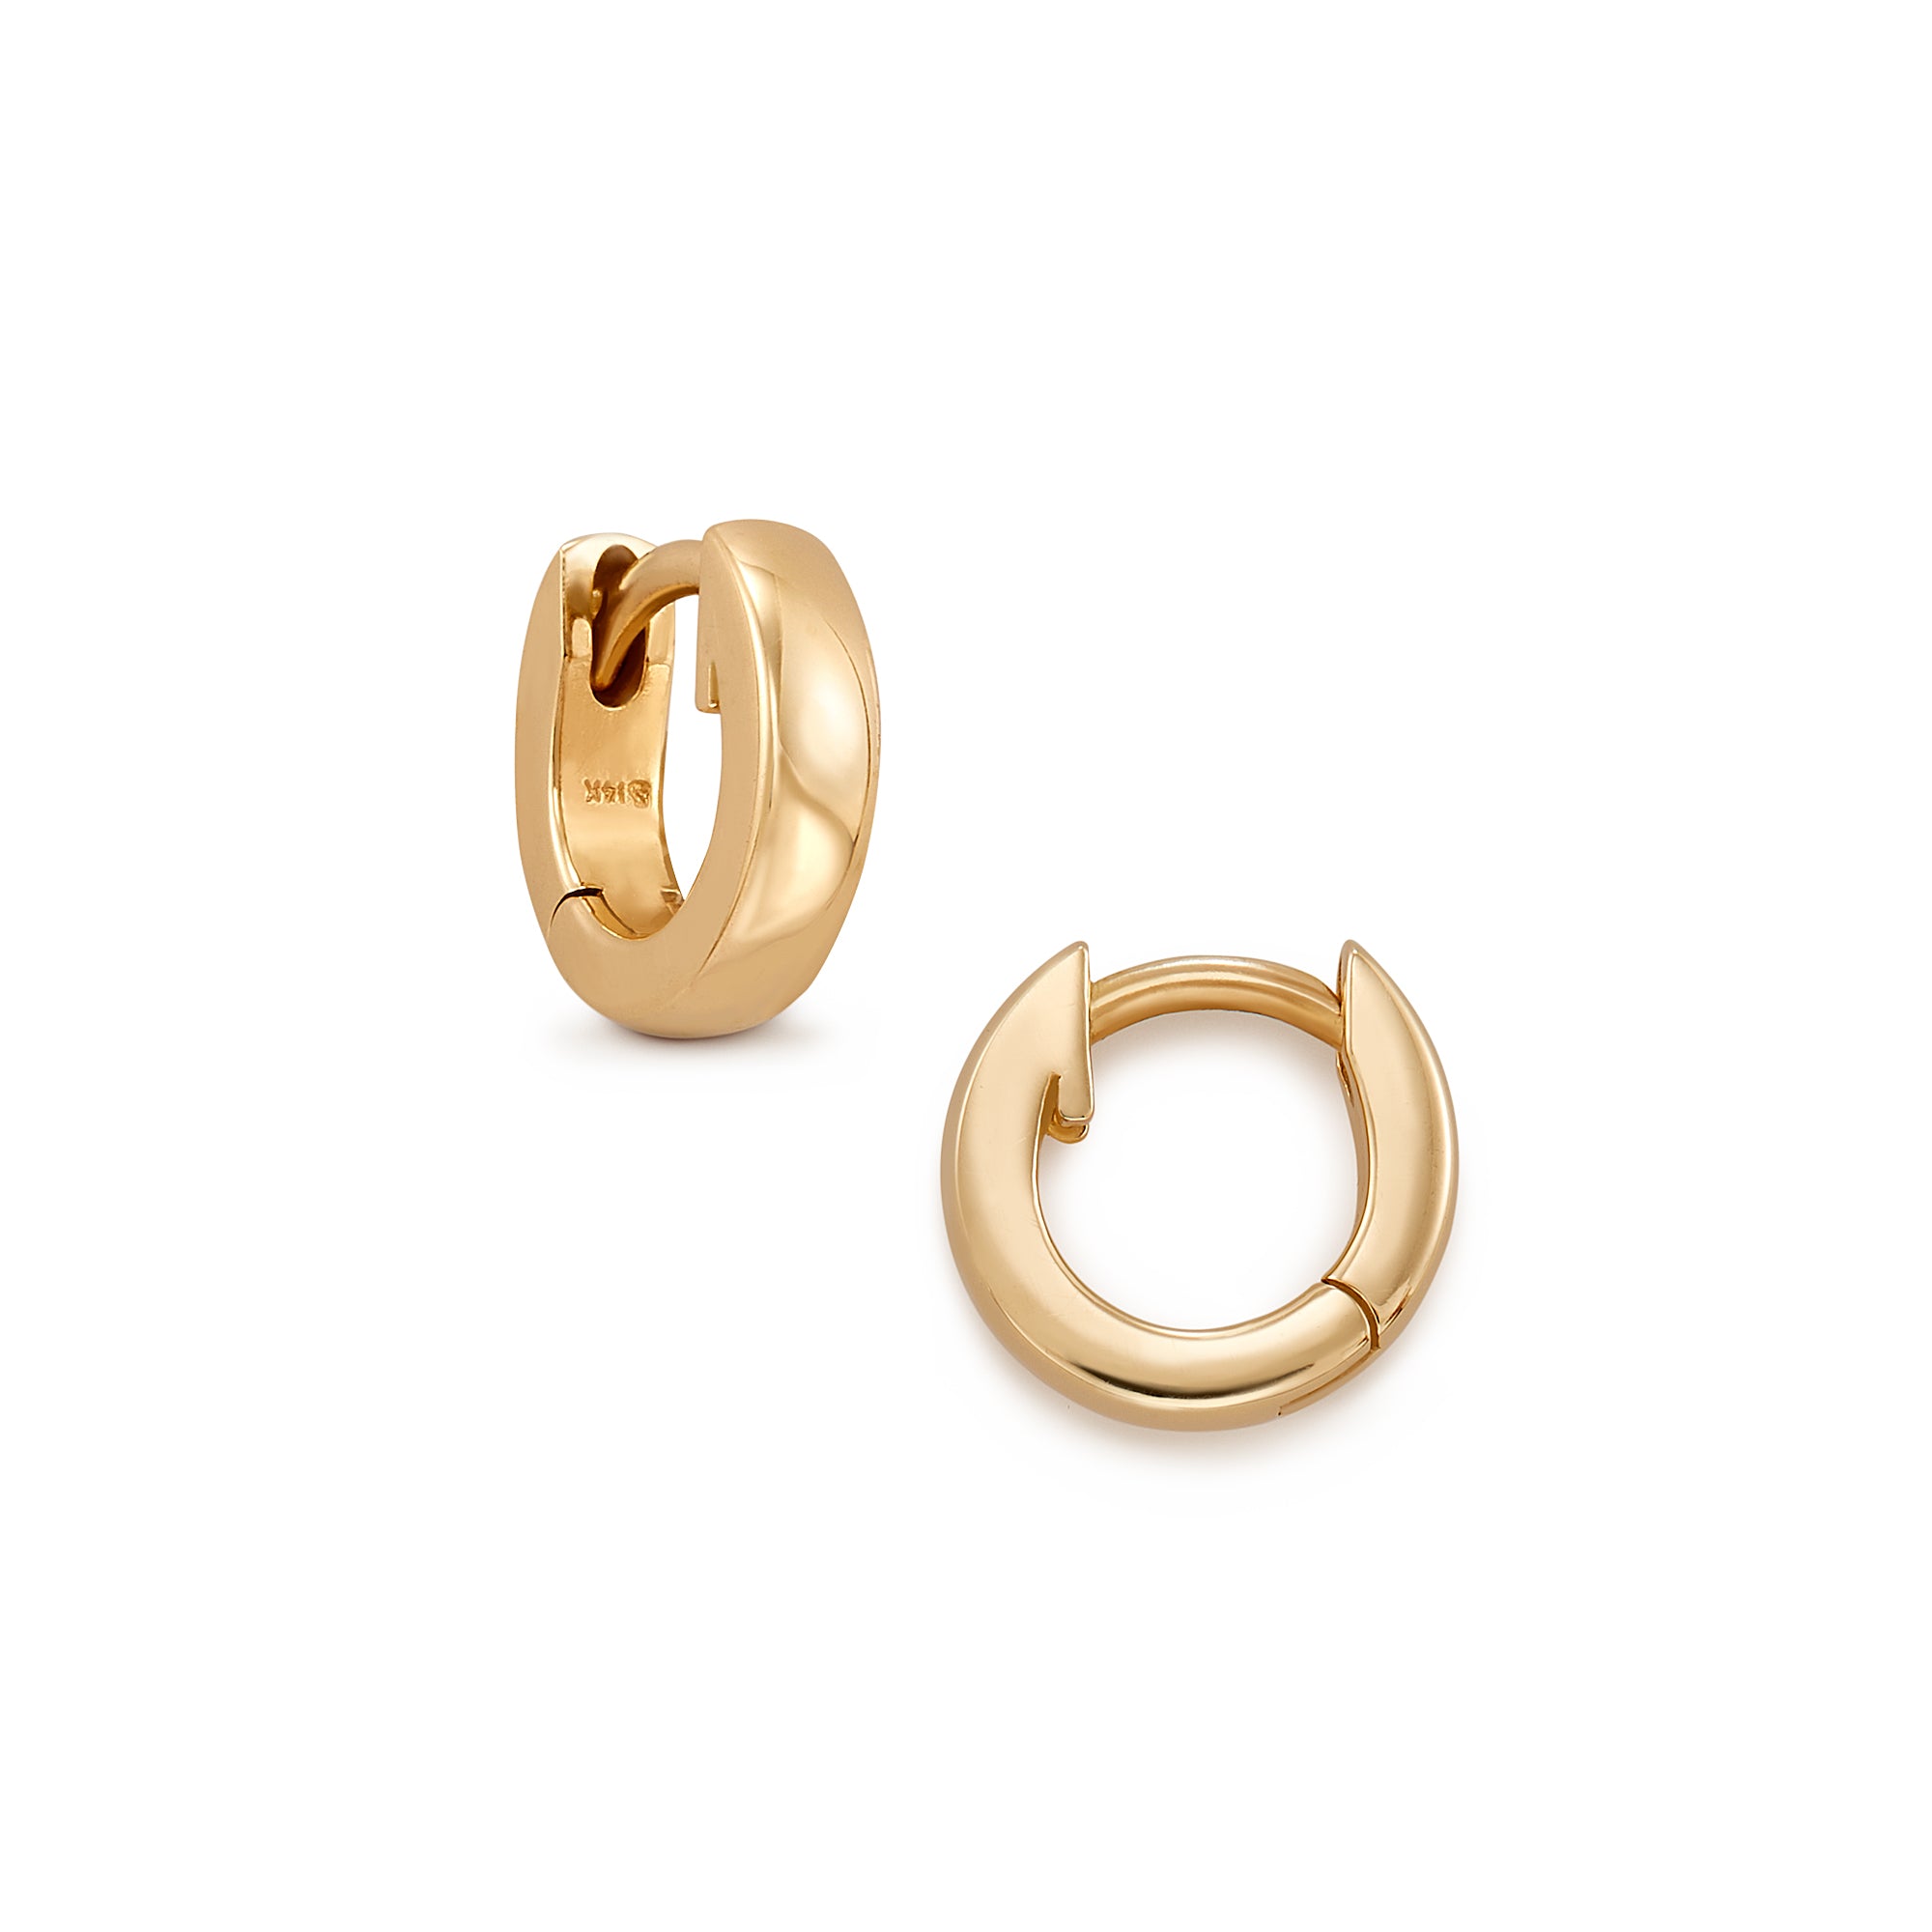 The Chubby Hinged Hoop hugs your earlobe while giving you something to notice. This chunky modern hoop is made from 14k gold